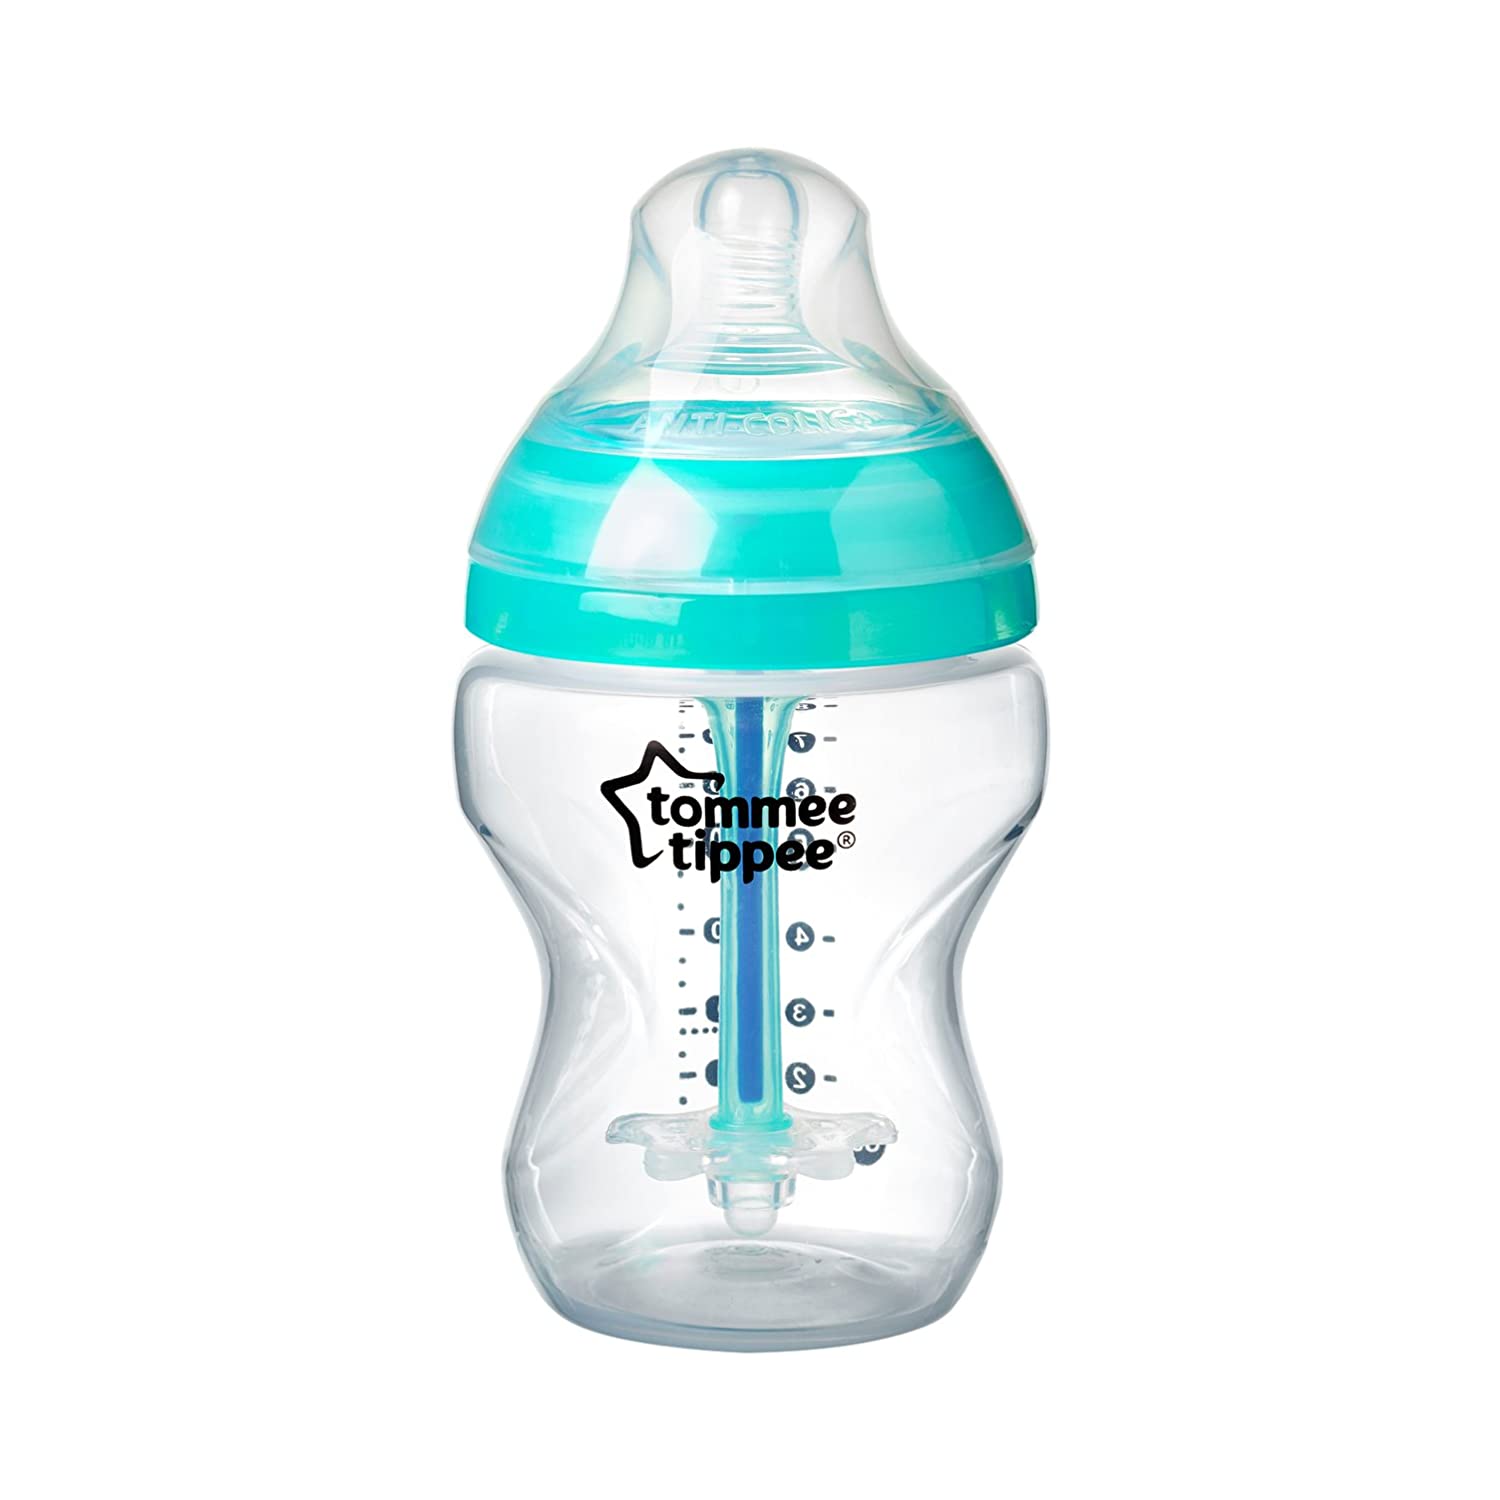 Tommee Tippee Anti-Colic Baby Bottle, Naturally Shaped Teat and Special Anti-Colic Vent System, 260 ml, Set of 1, Clear (Colour and Design May Vary)